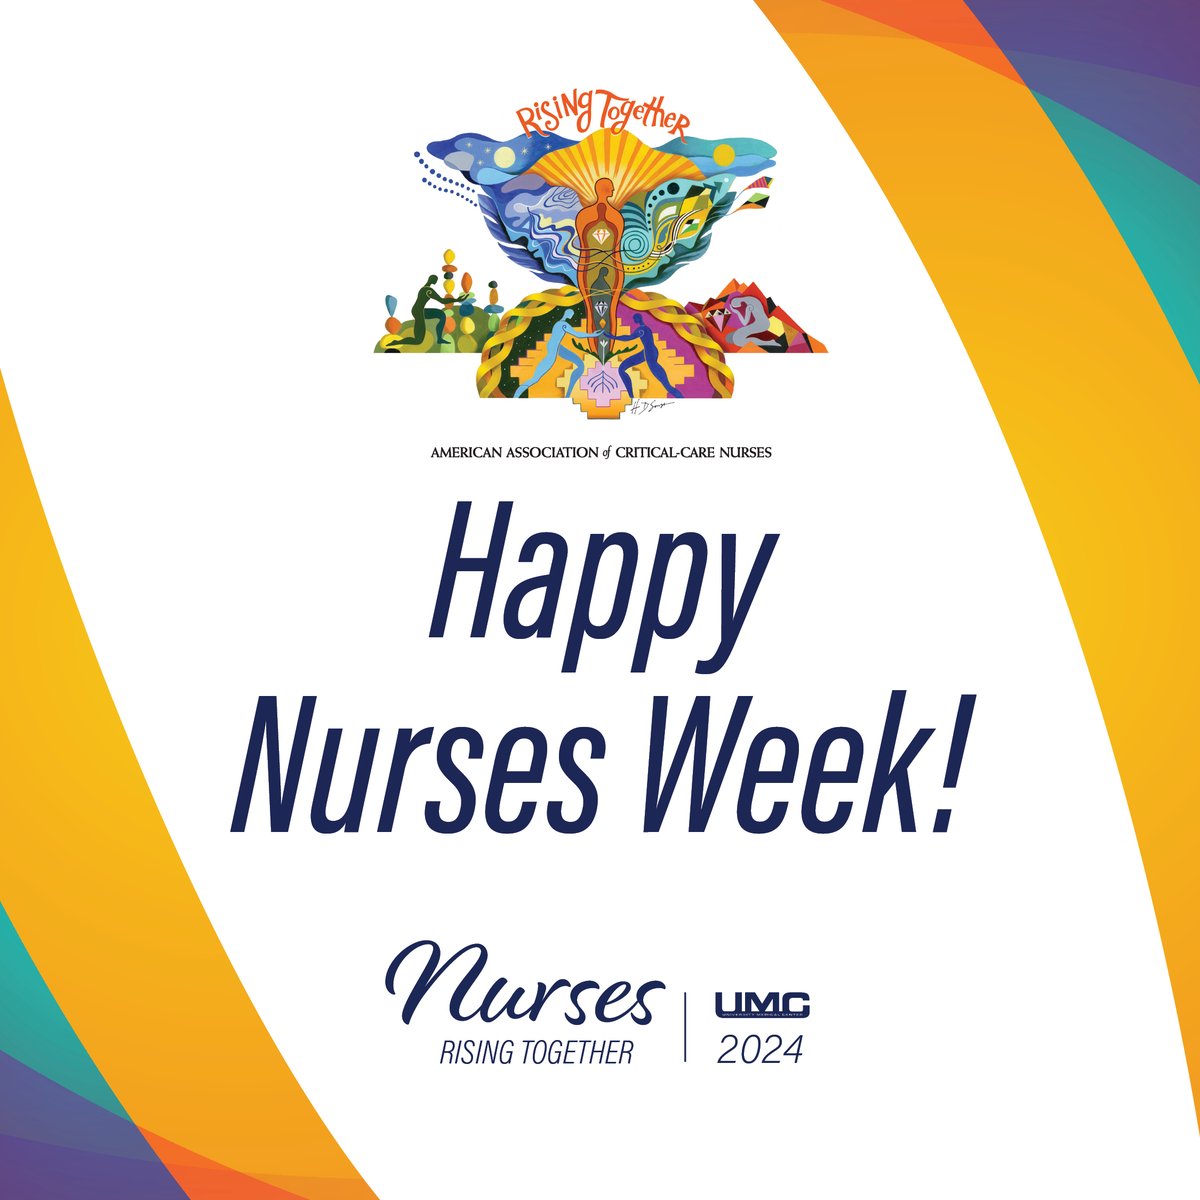 UMC celebrates Nurses Week! We are so proud to have an incredible and compassionate team of nurses who go above and beyond to ensure our patients are getting the highest level of care every day. Thank you for all that you do! #NursesWeek #ThankANurse